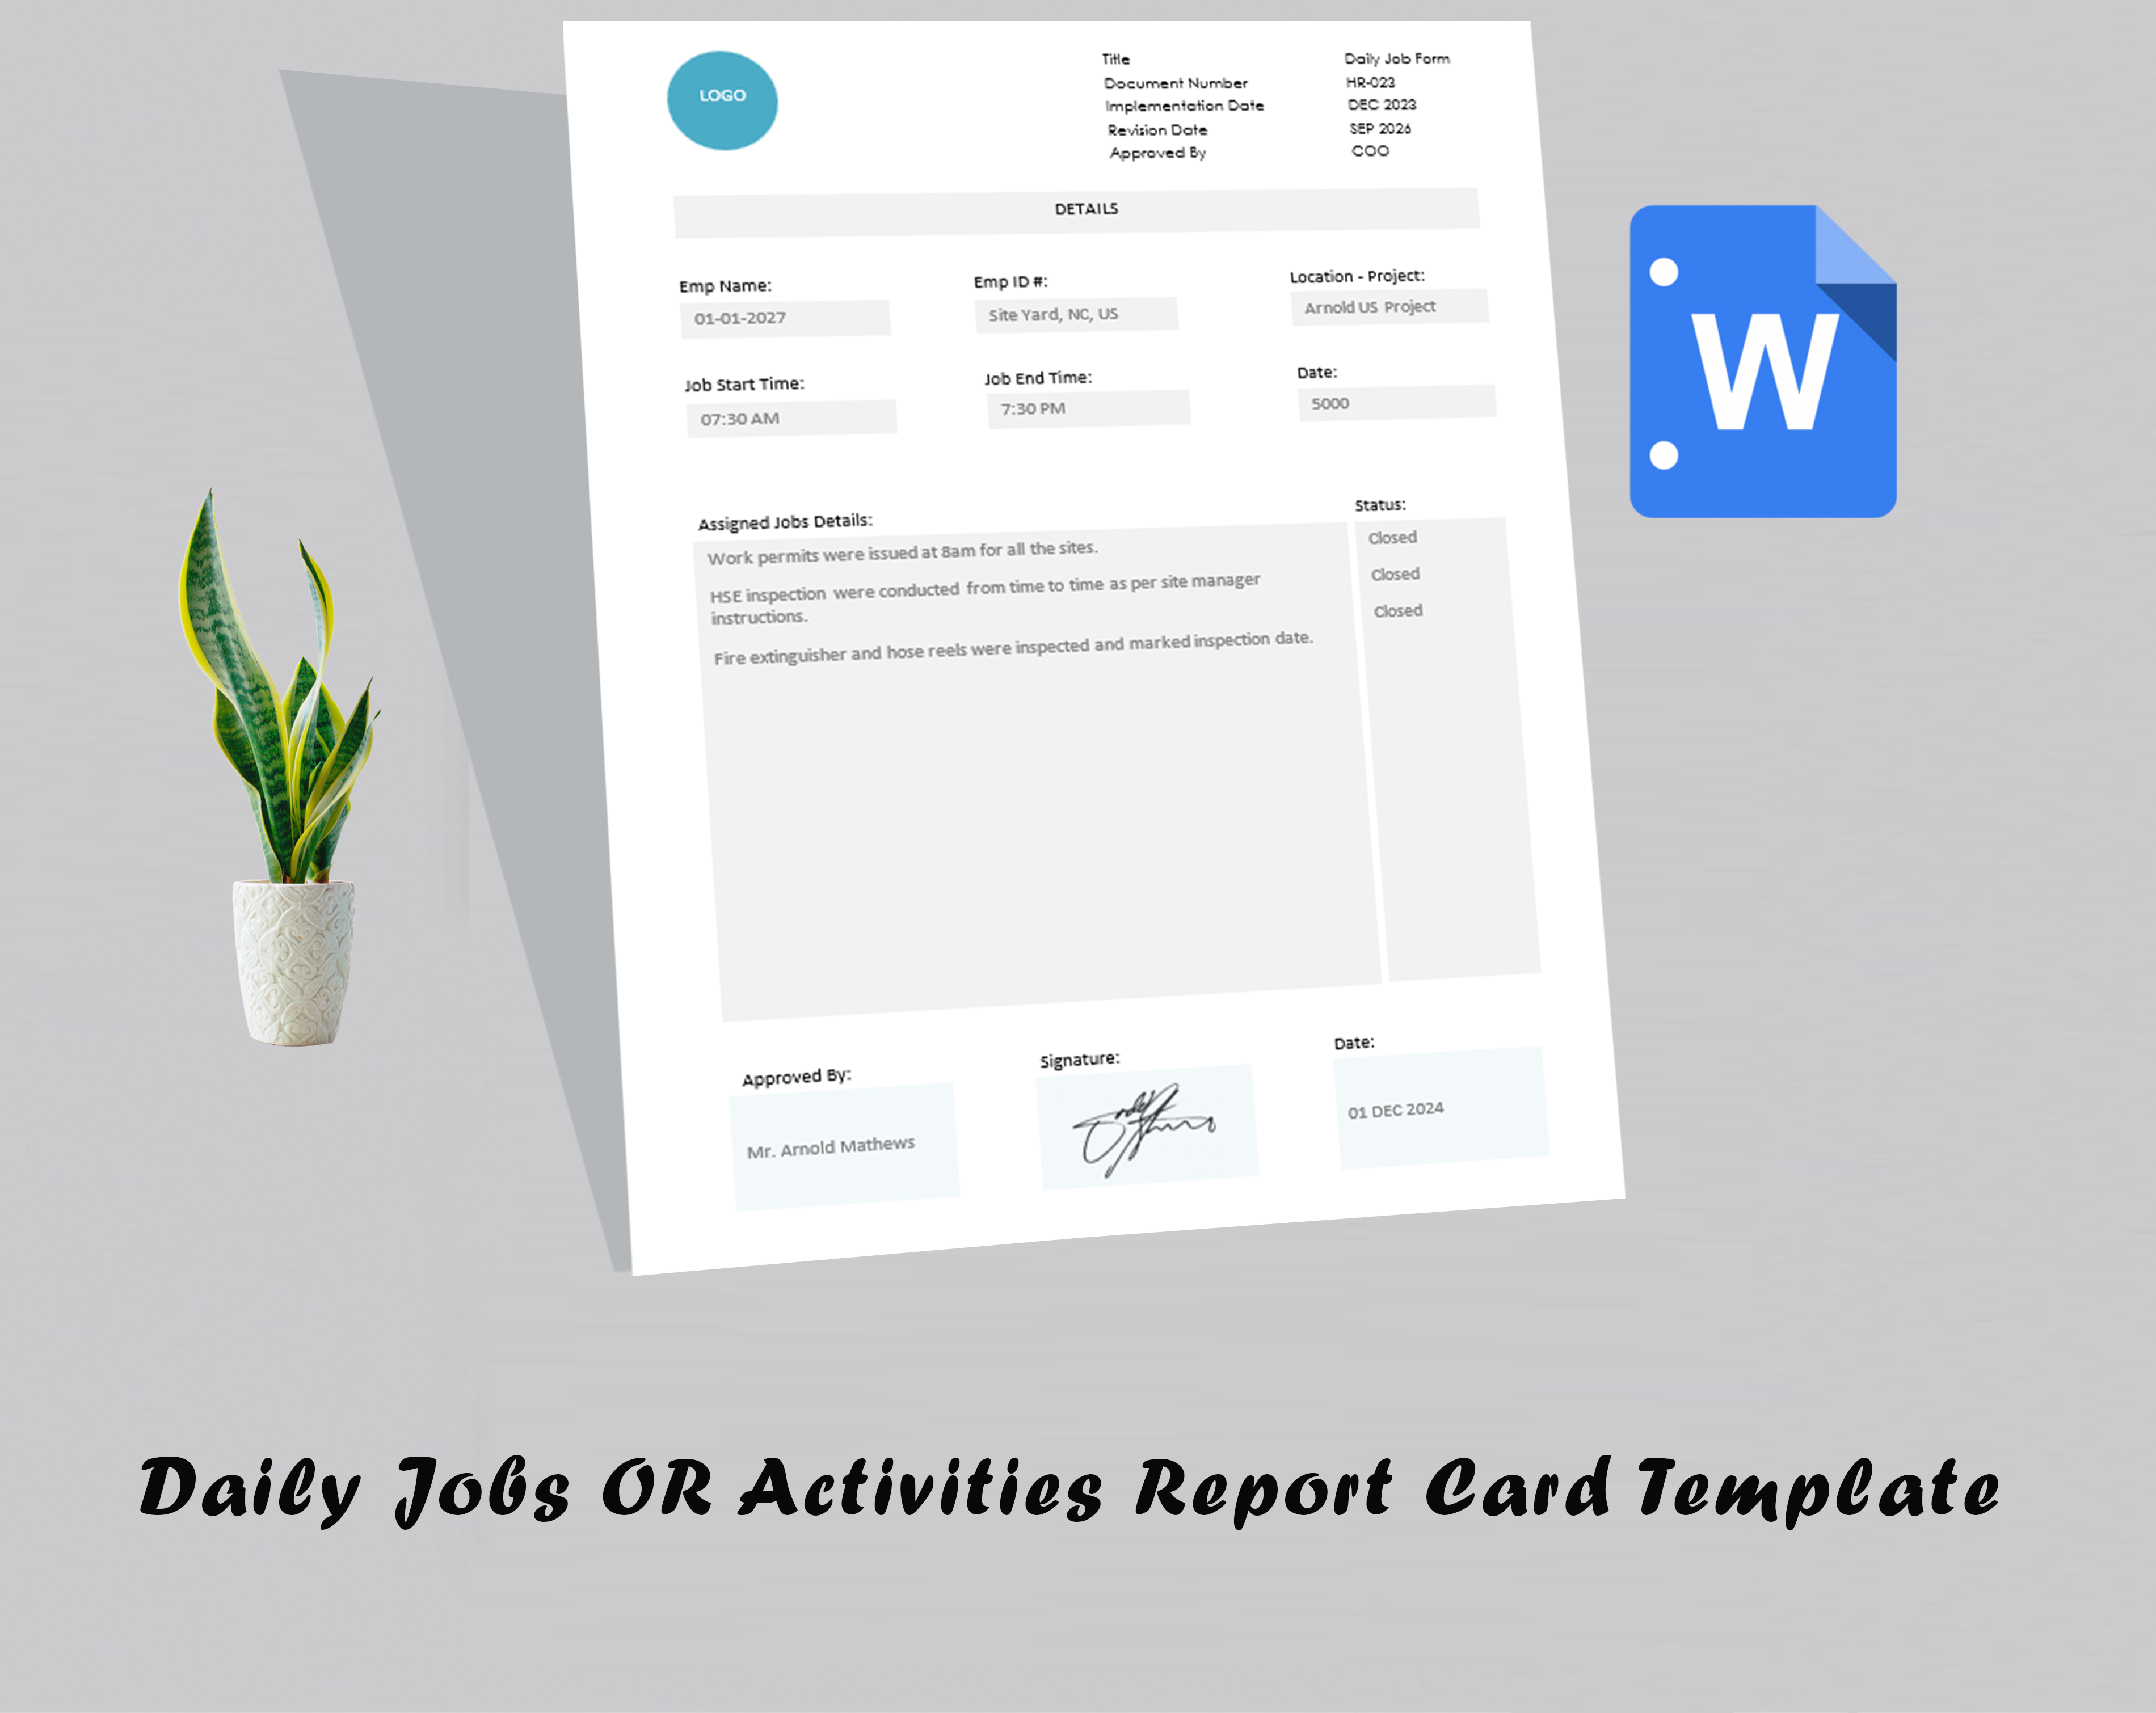 Daily Jobs OR Activities Report Card Template